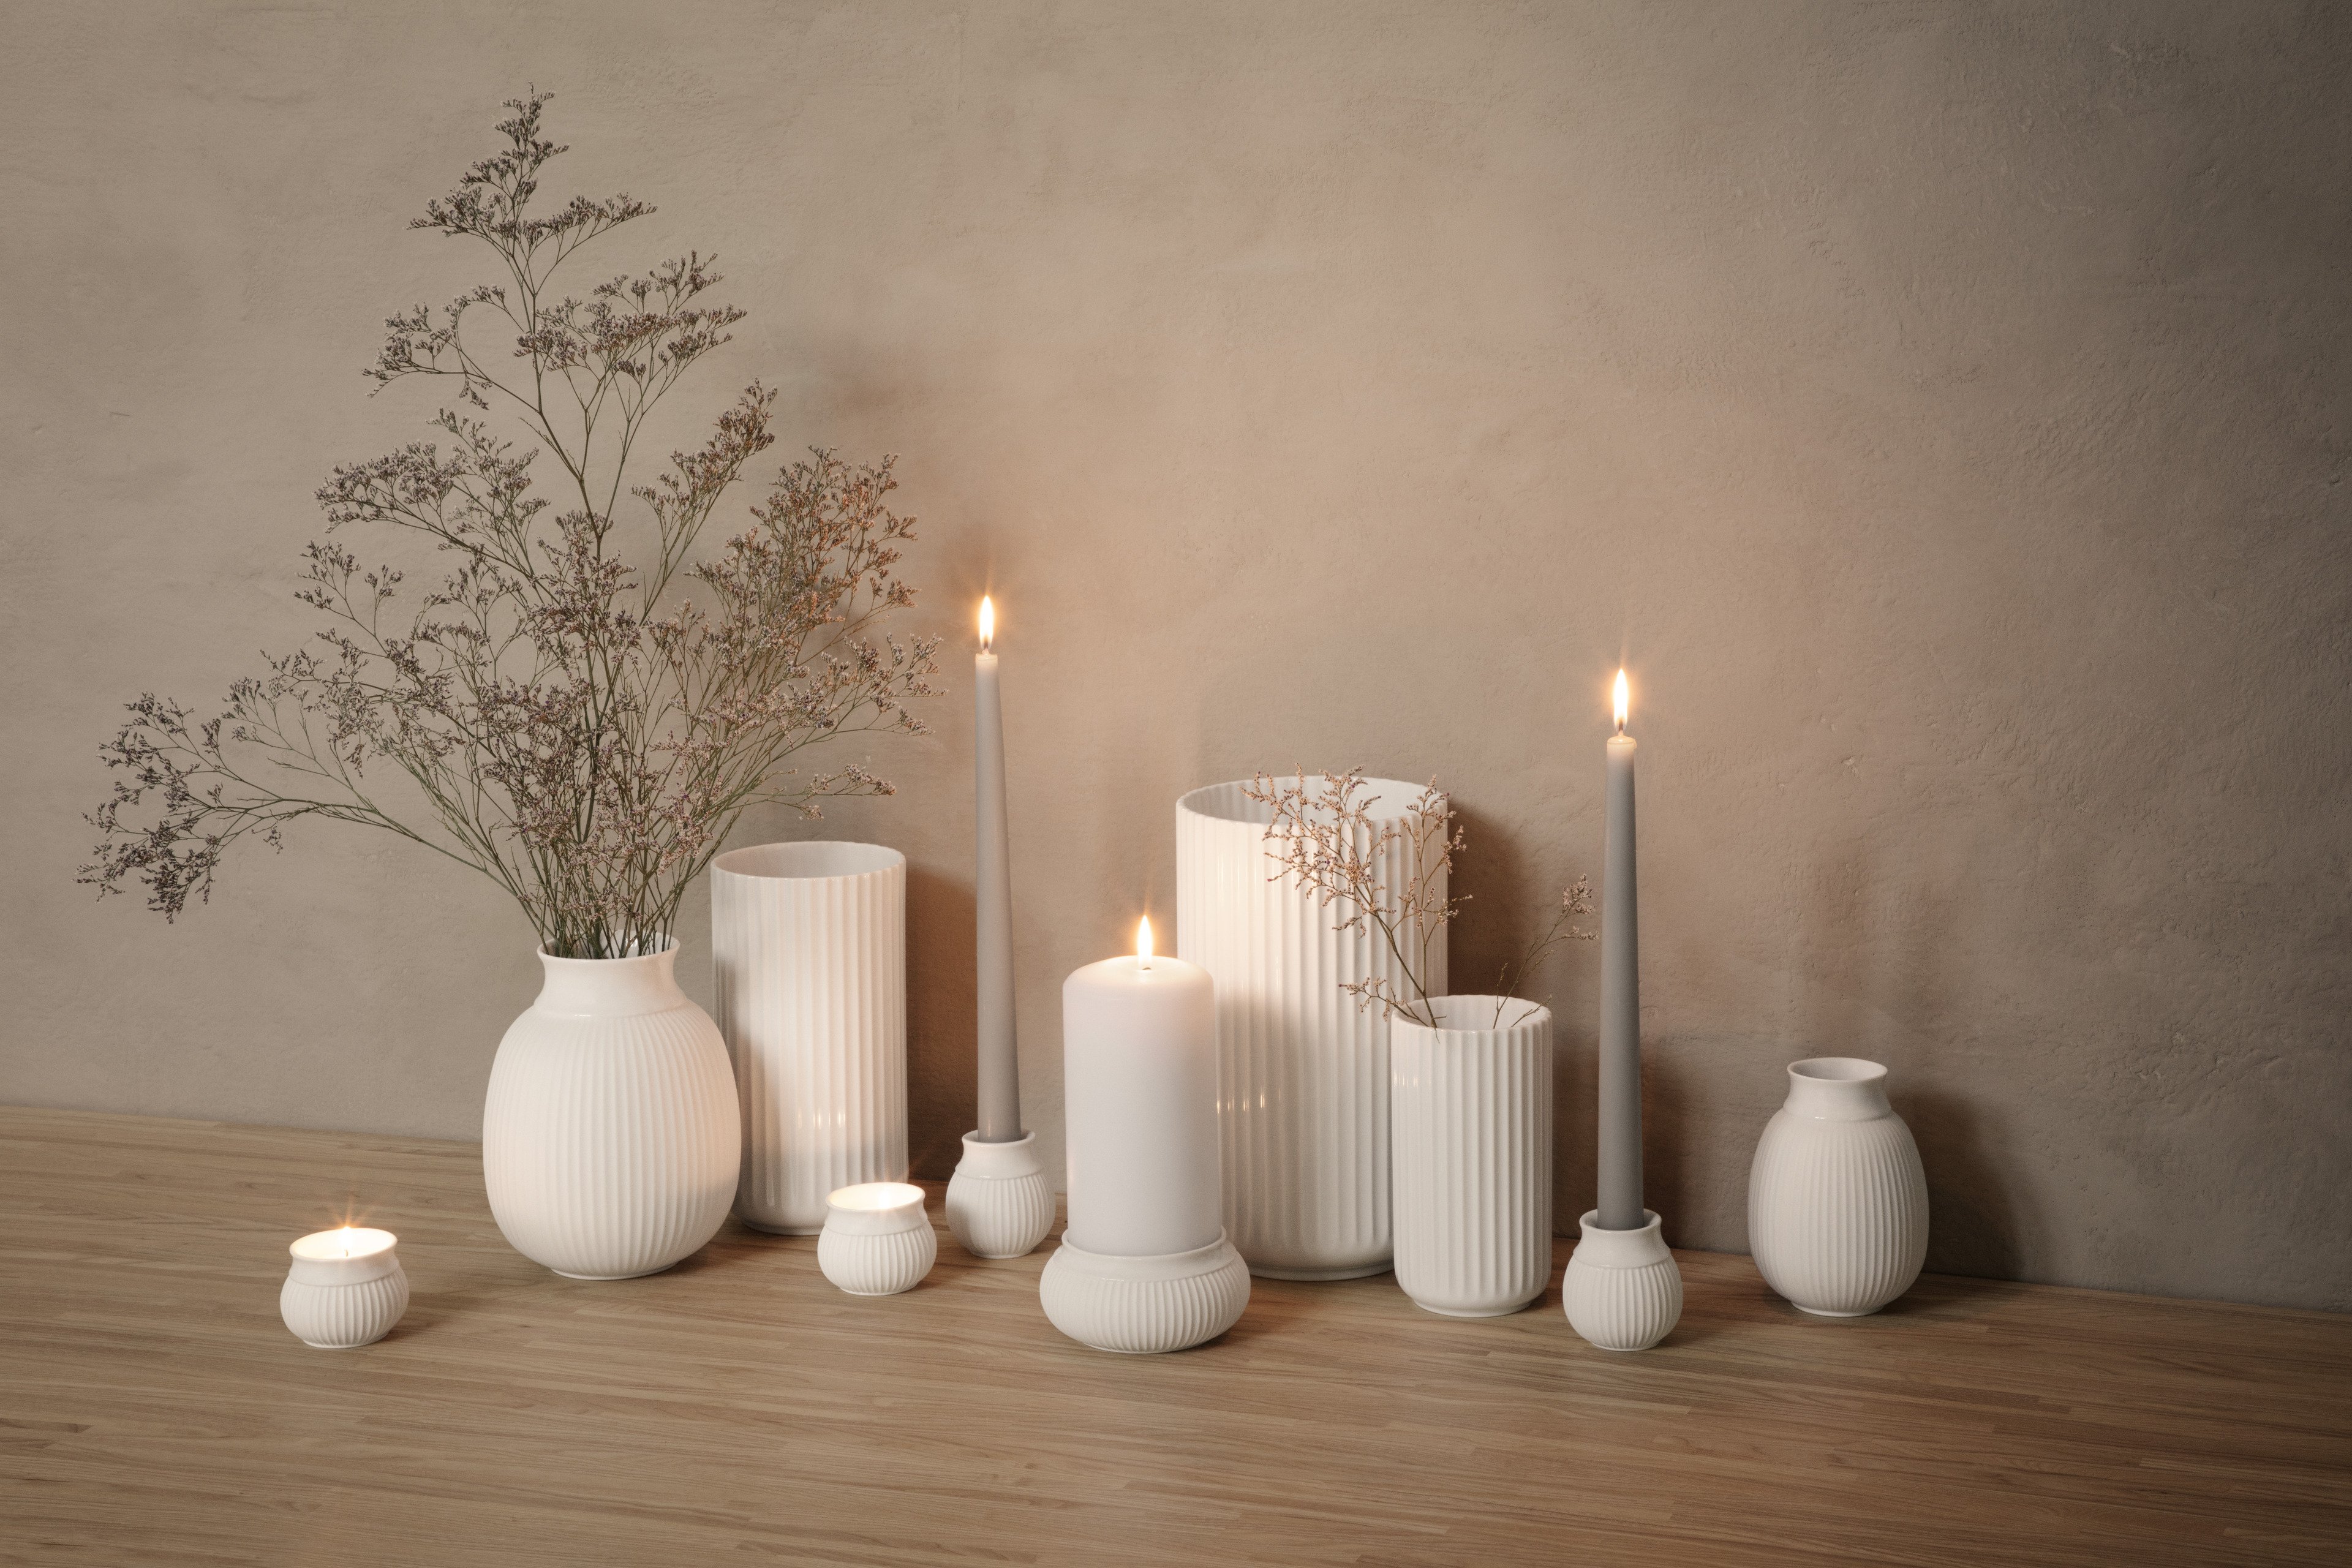 Vases and candlesticks from Lyngby Porcelæn on a table